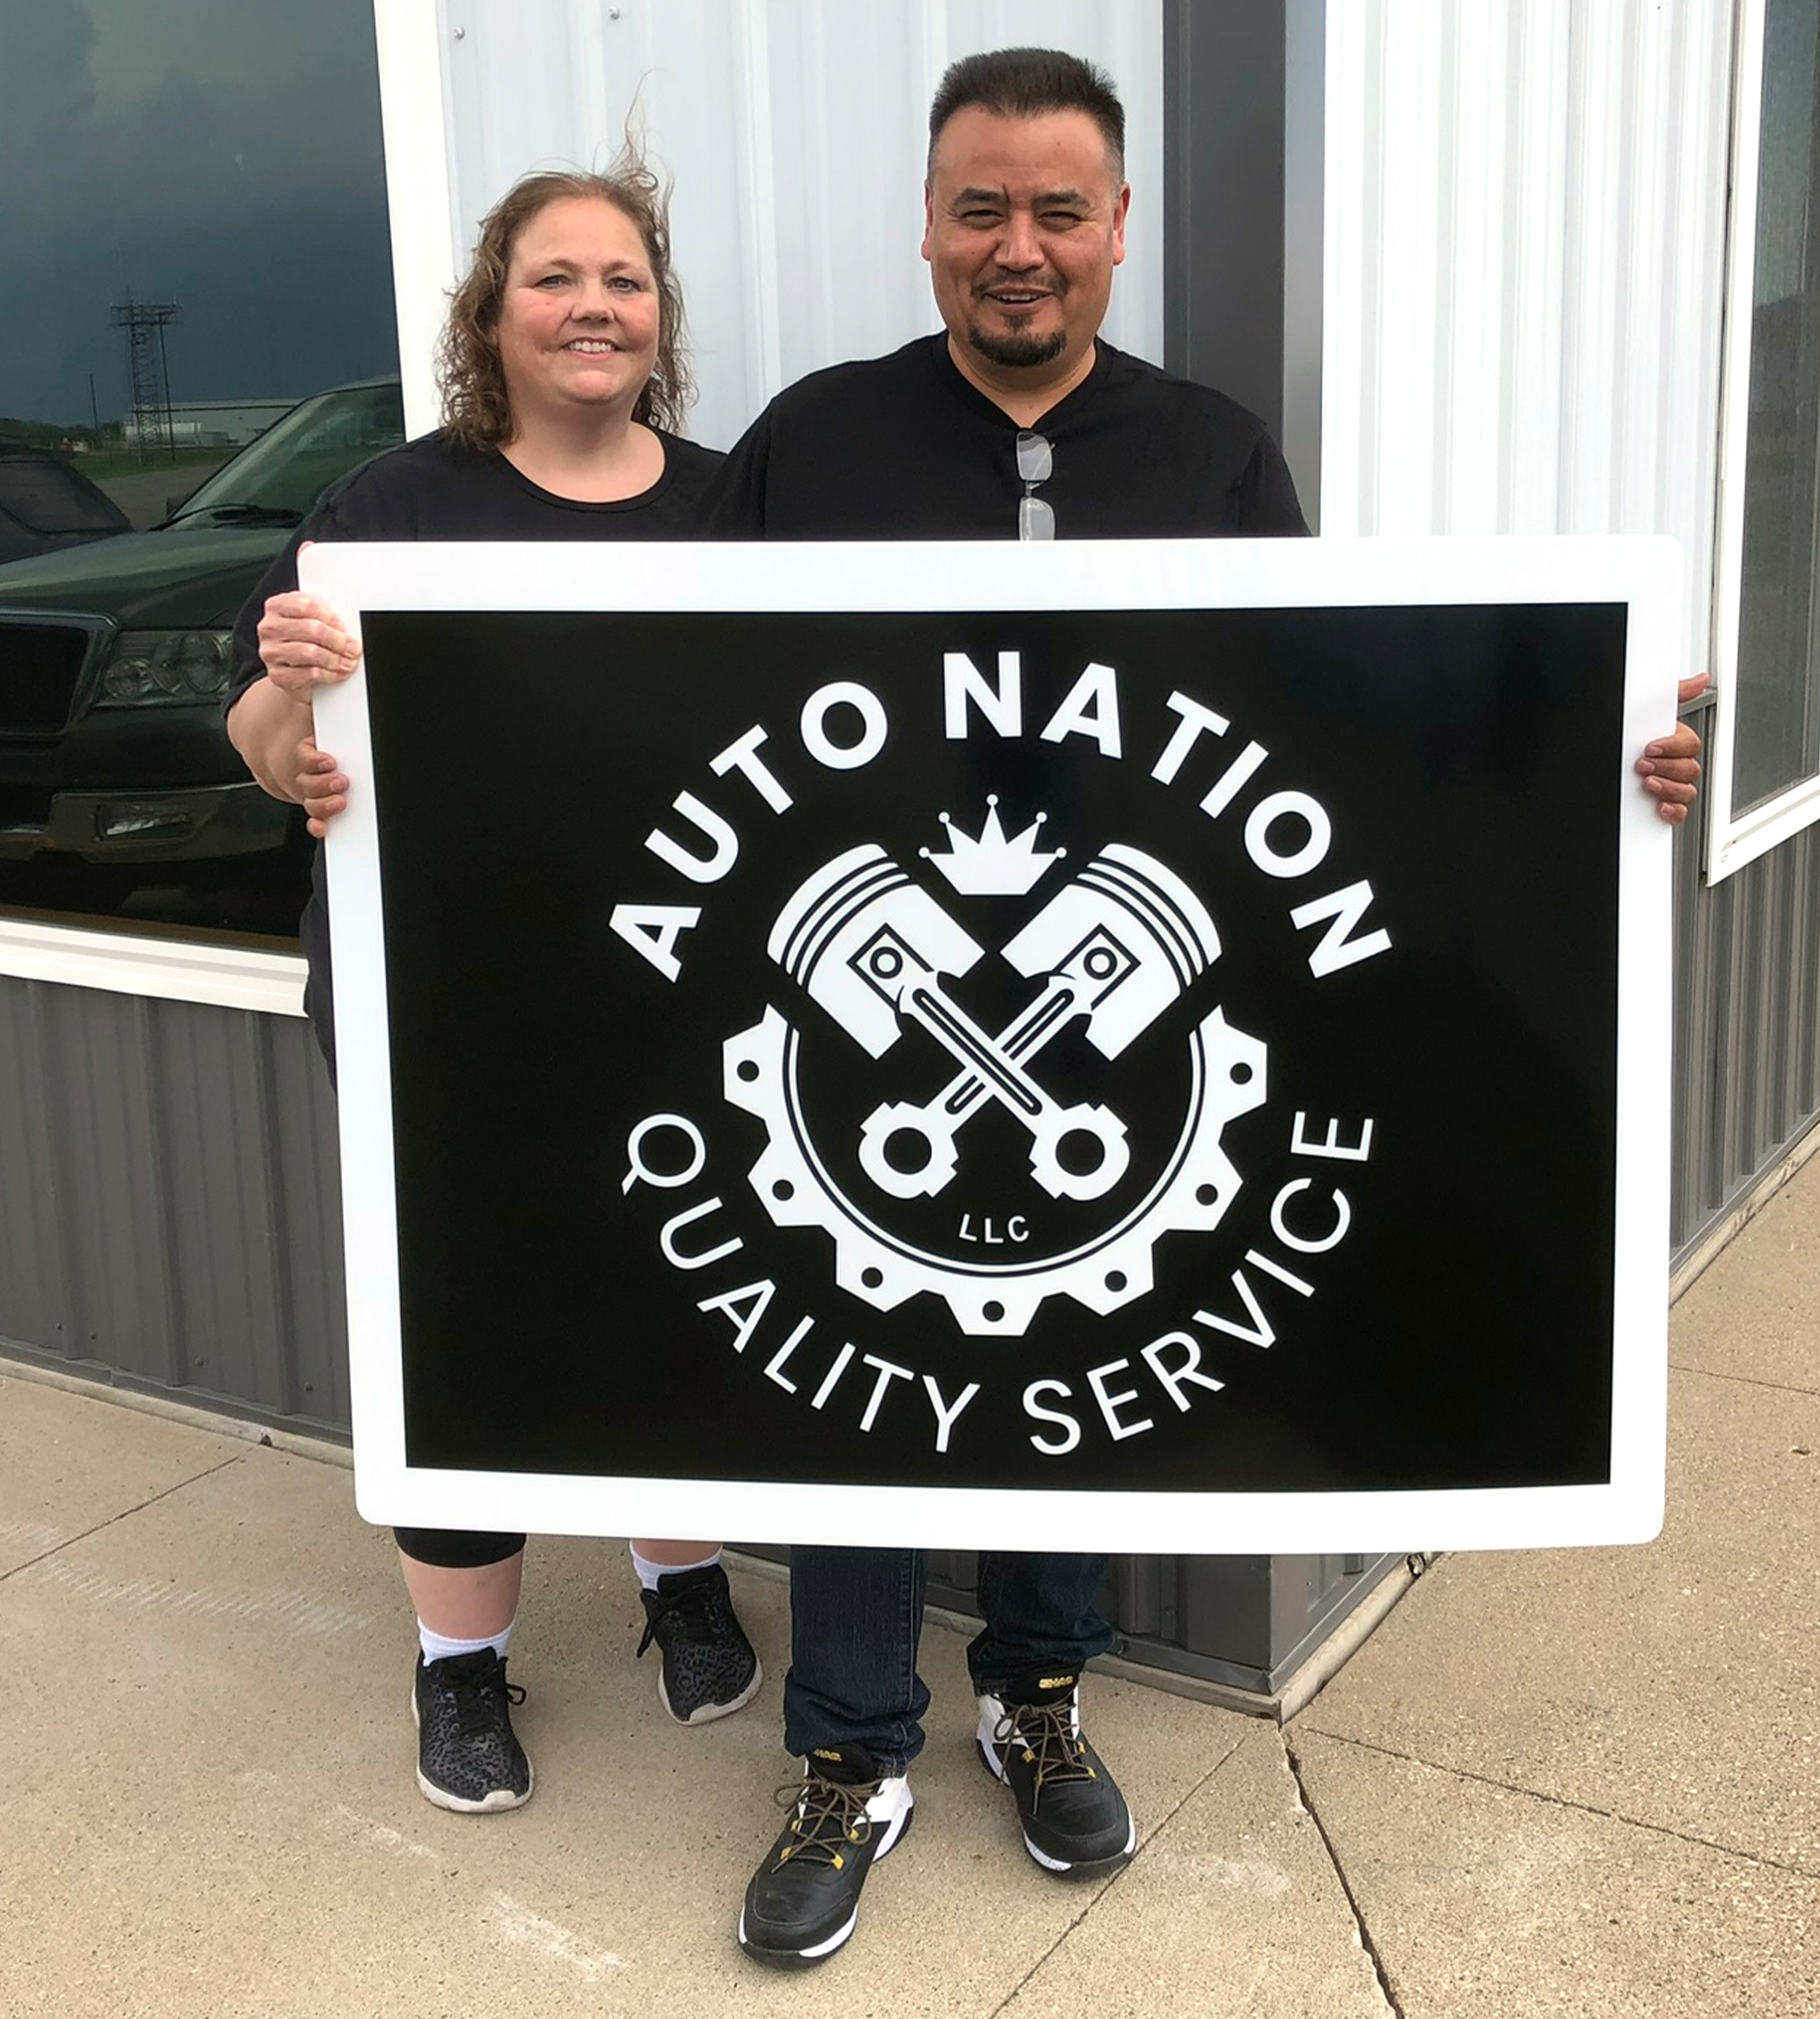 Businesses owners hold up sign saying "Auto Nation Quality Service" 